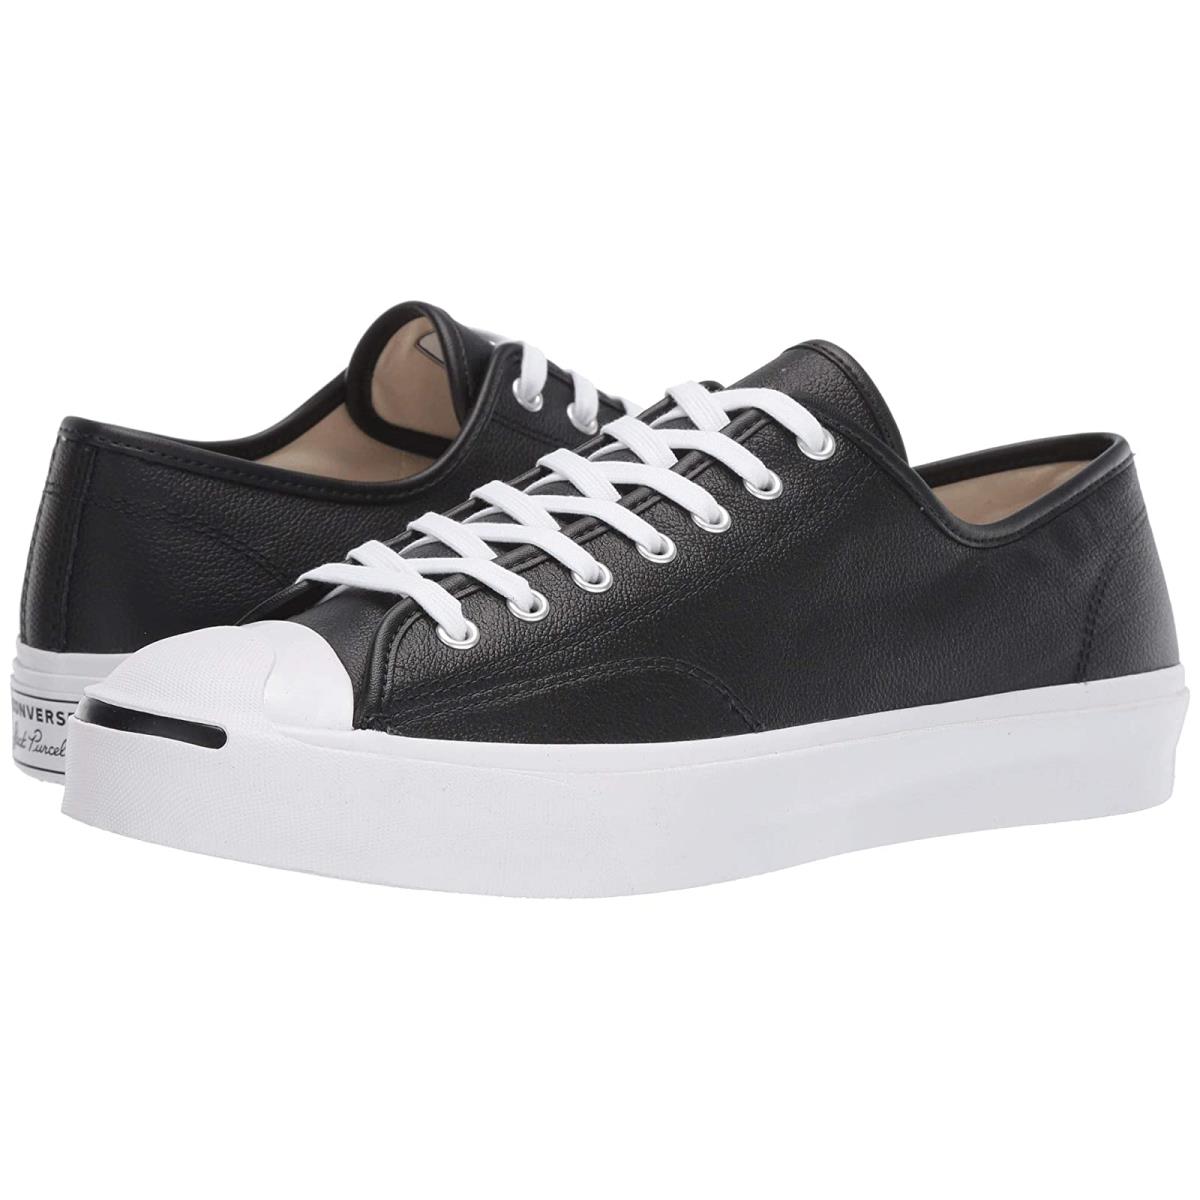 Unisex Sneakers Athletic Shoes Converse Jack Purcell Gold Standard Leather Black/White/White